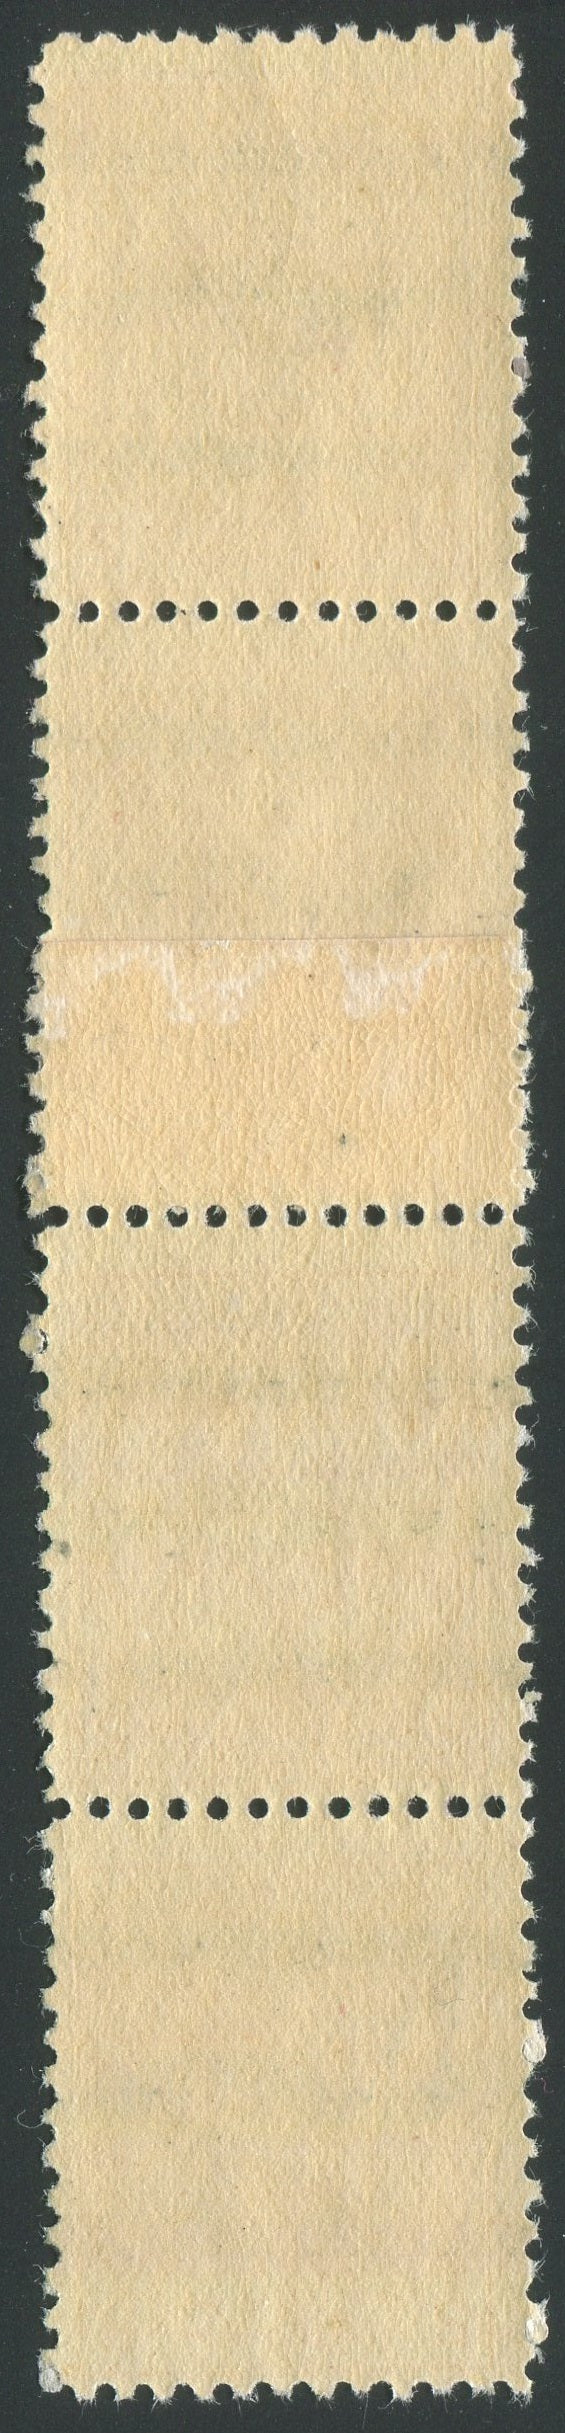 0090CA2011 - Canada #90xxxi Mint Experimental Coil Paste-Up Strip of 4